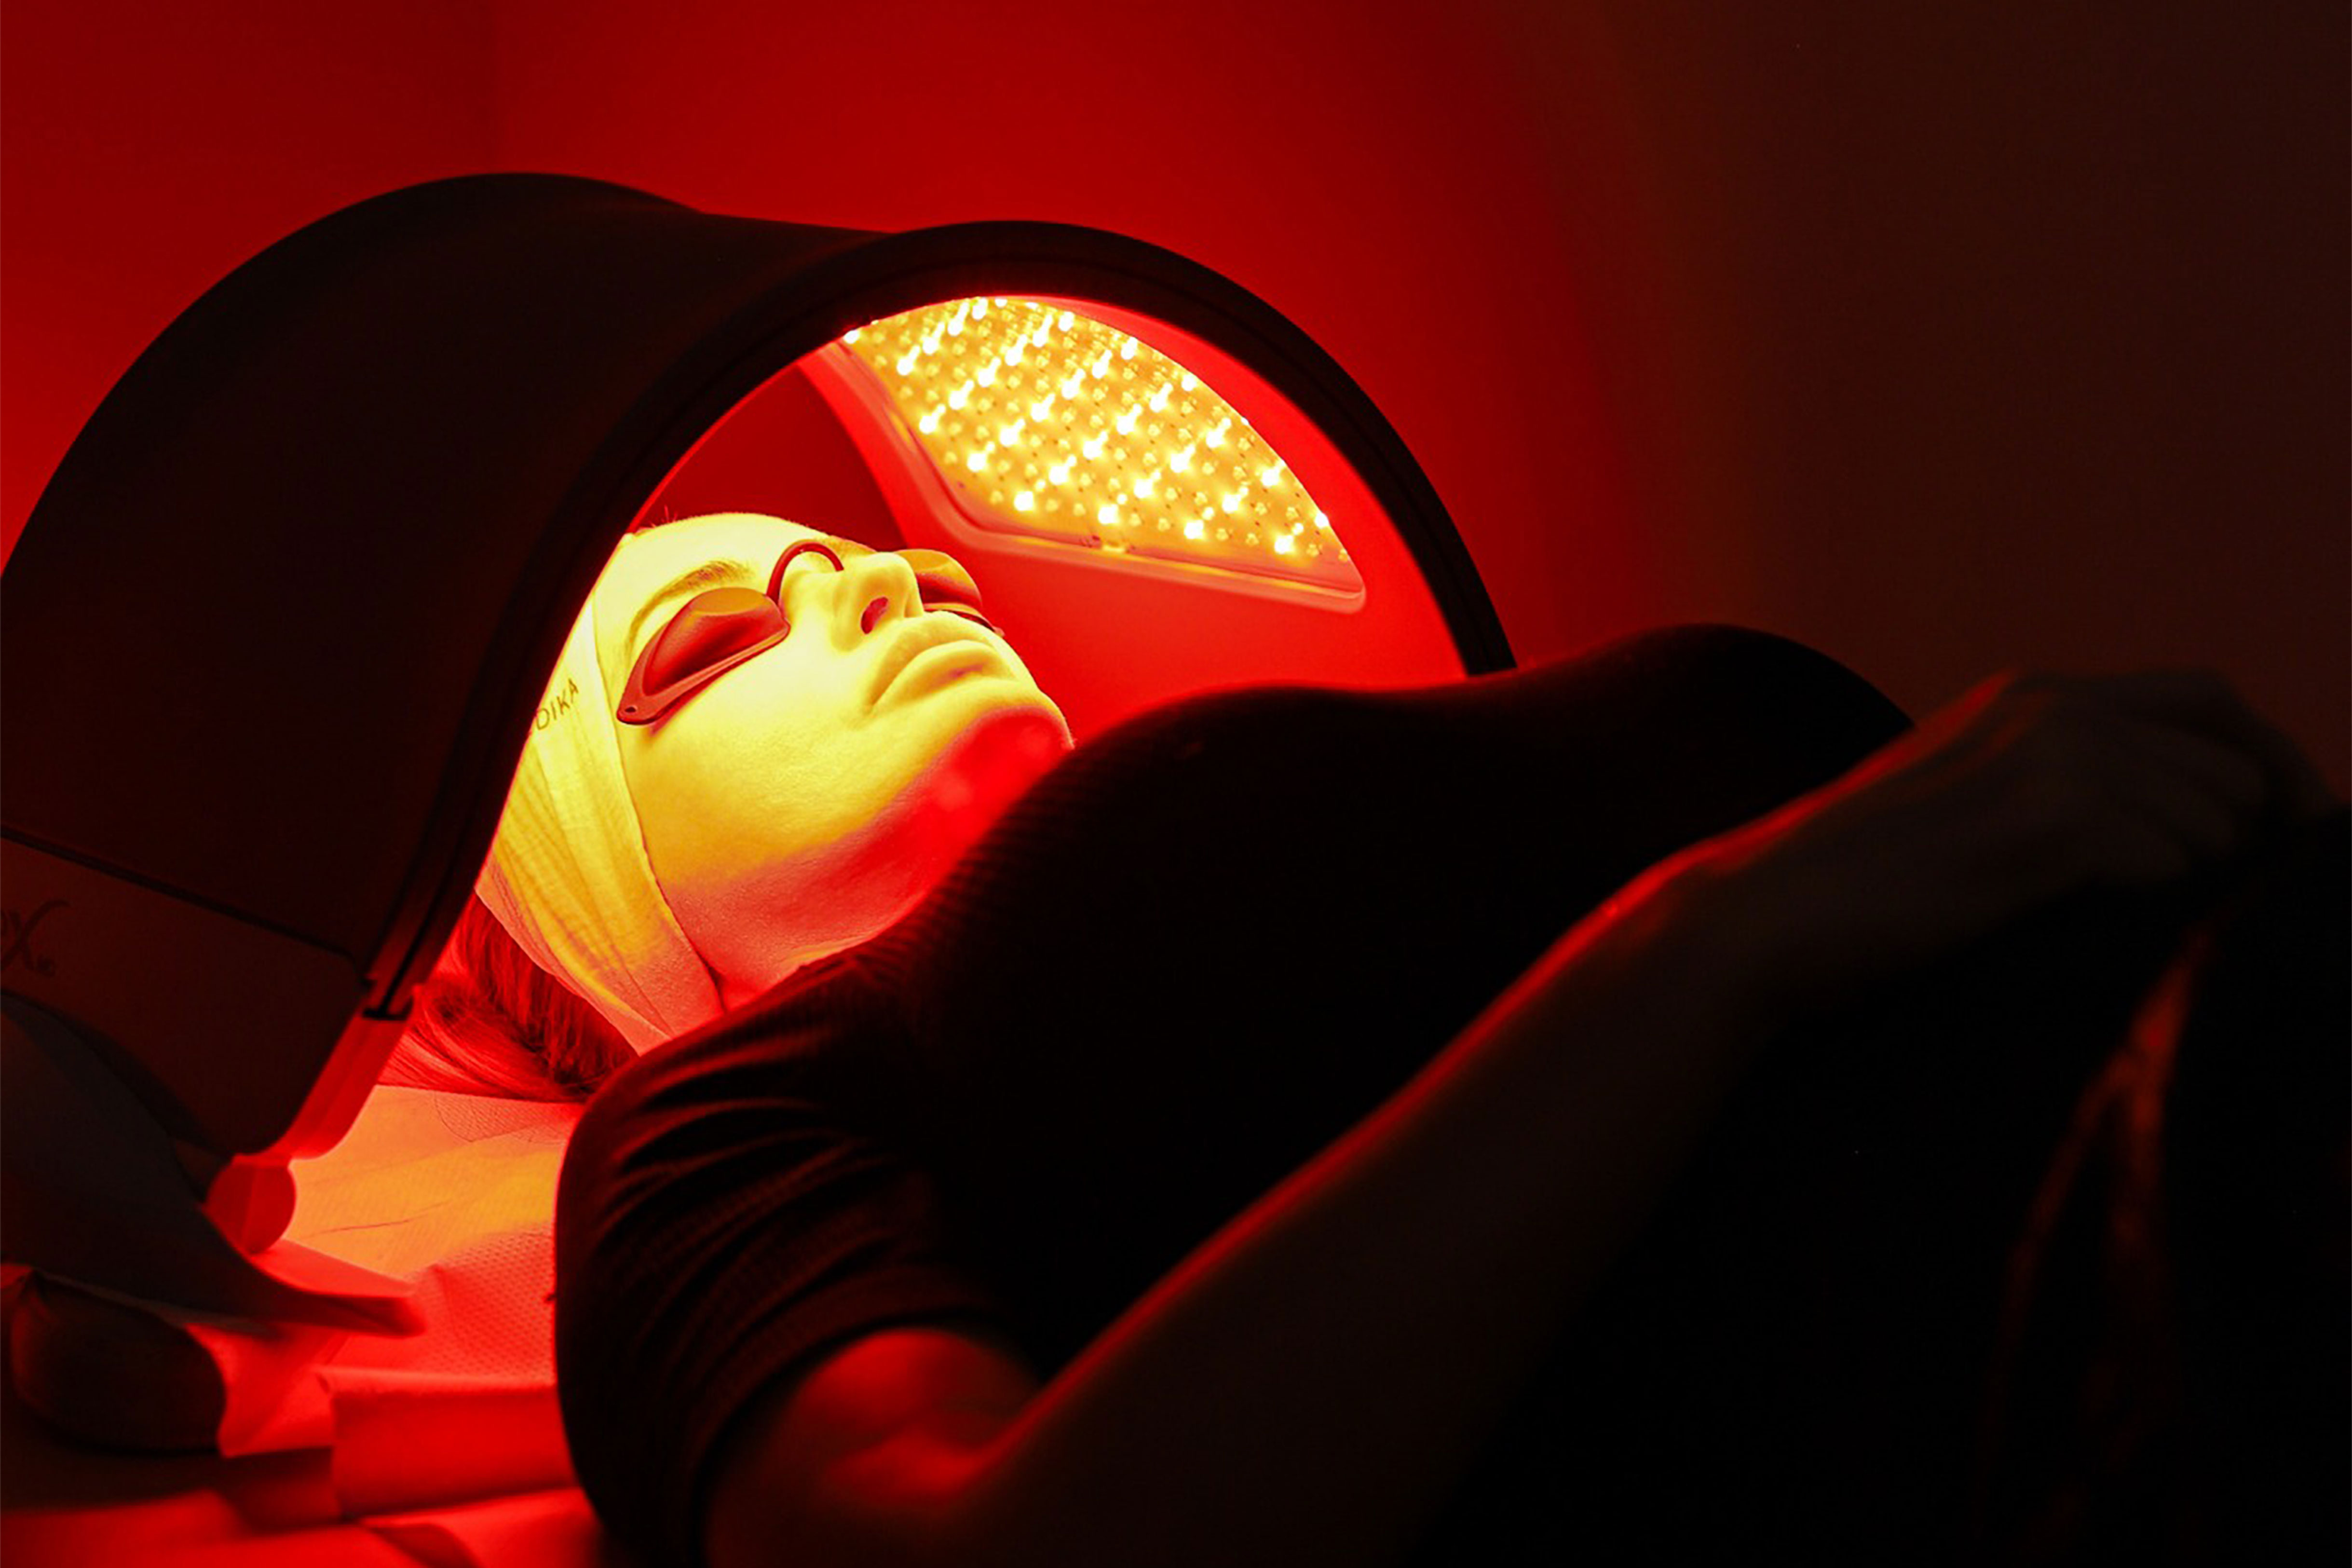 The Media Clinic Manchester luxury skin care Dermalux LED light therapy treatment